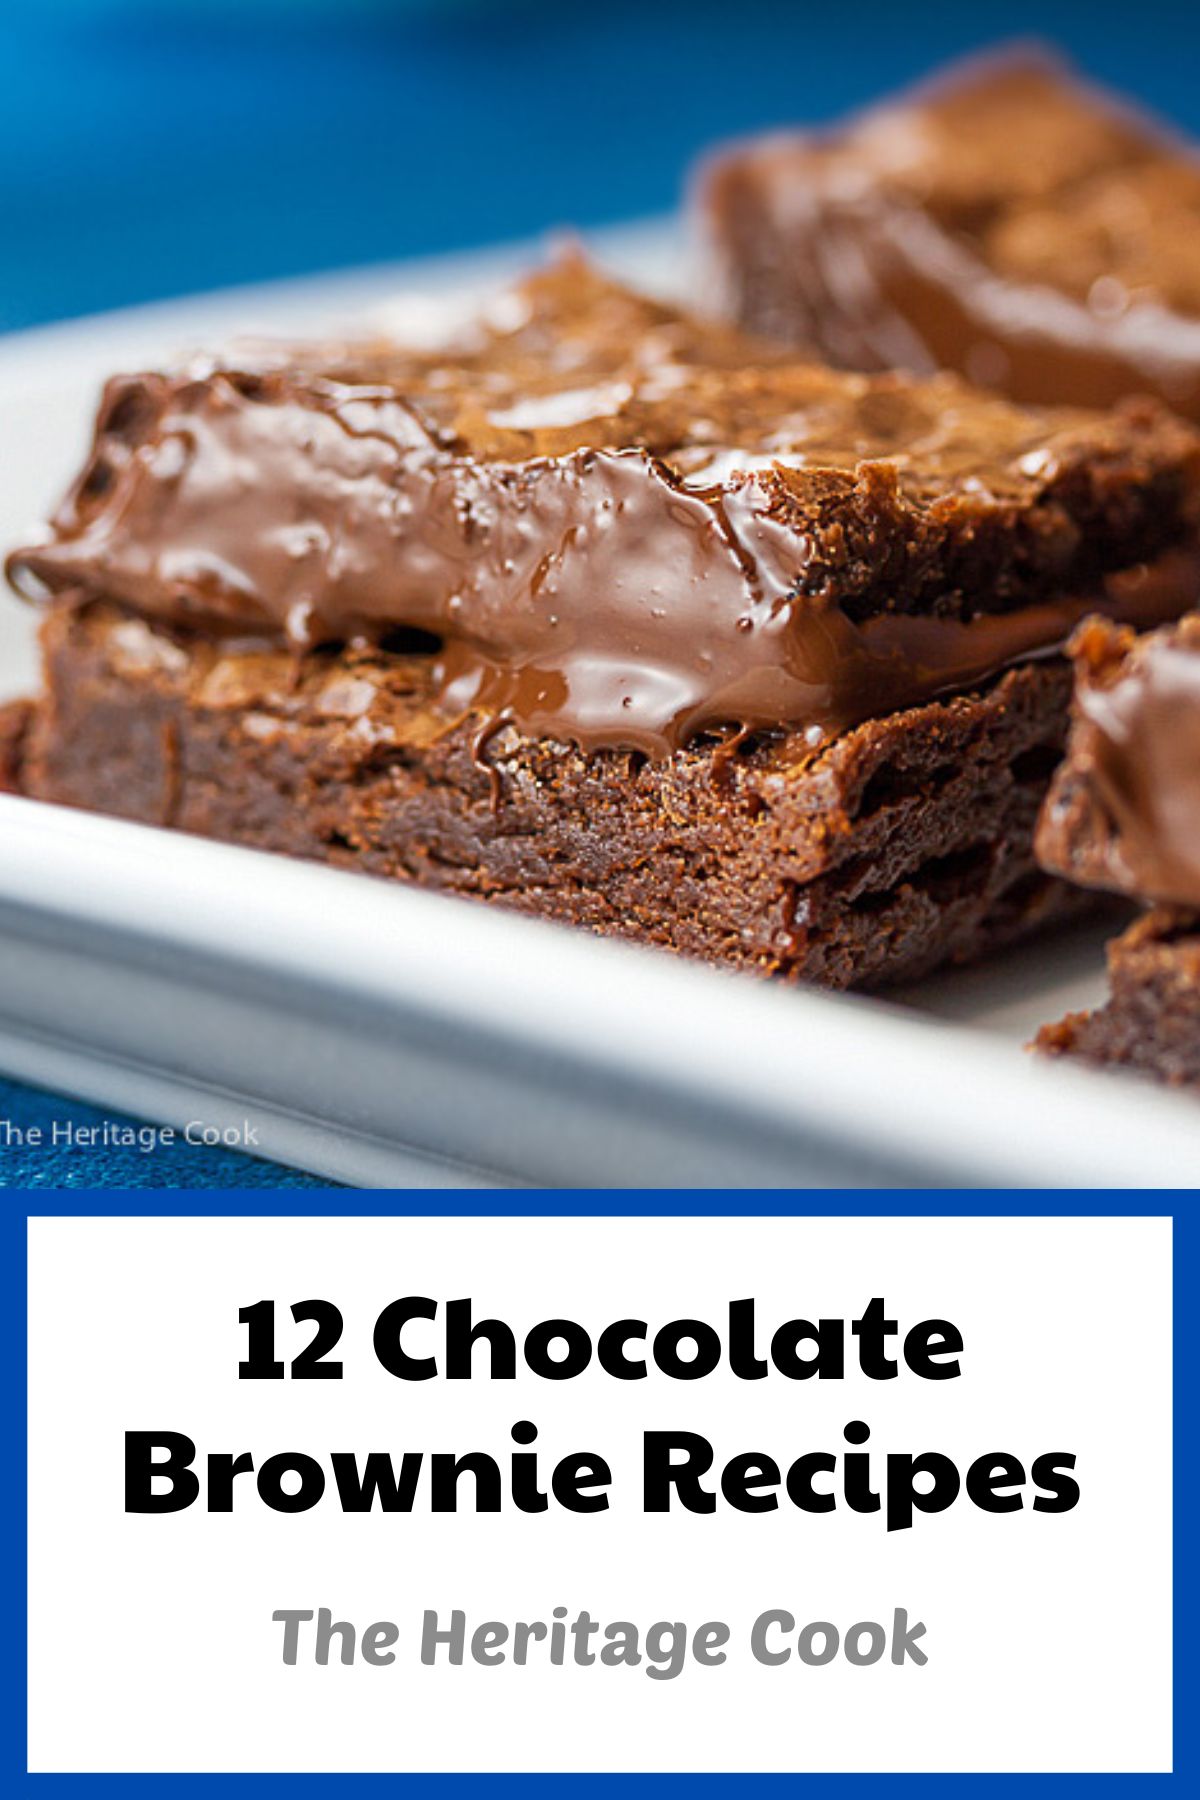 12 Outstanding Chocolate Brownie Recipes; A collection of 12 chocolate brownie recipes from some of the finest bloggers on the Internet; Recipe collection compiled by Jane Bonacci, The Heritage Cook 2023. 